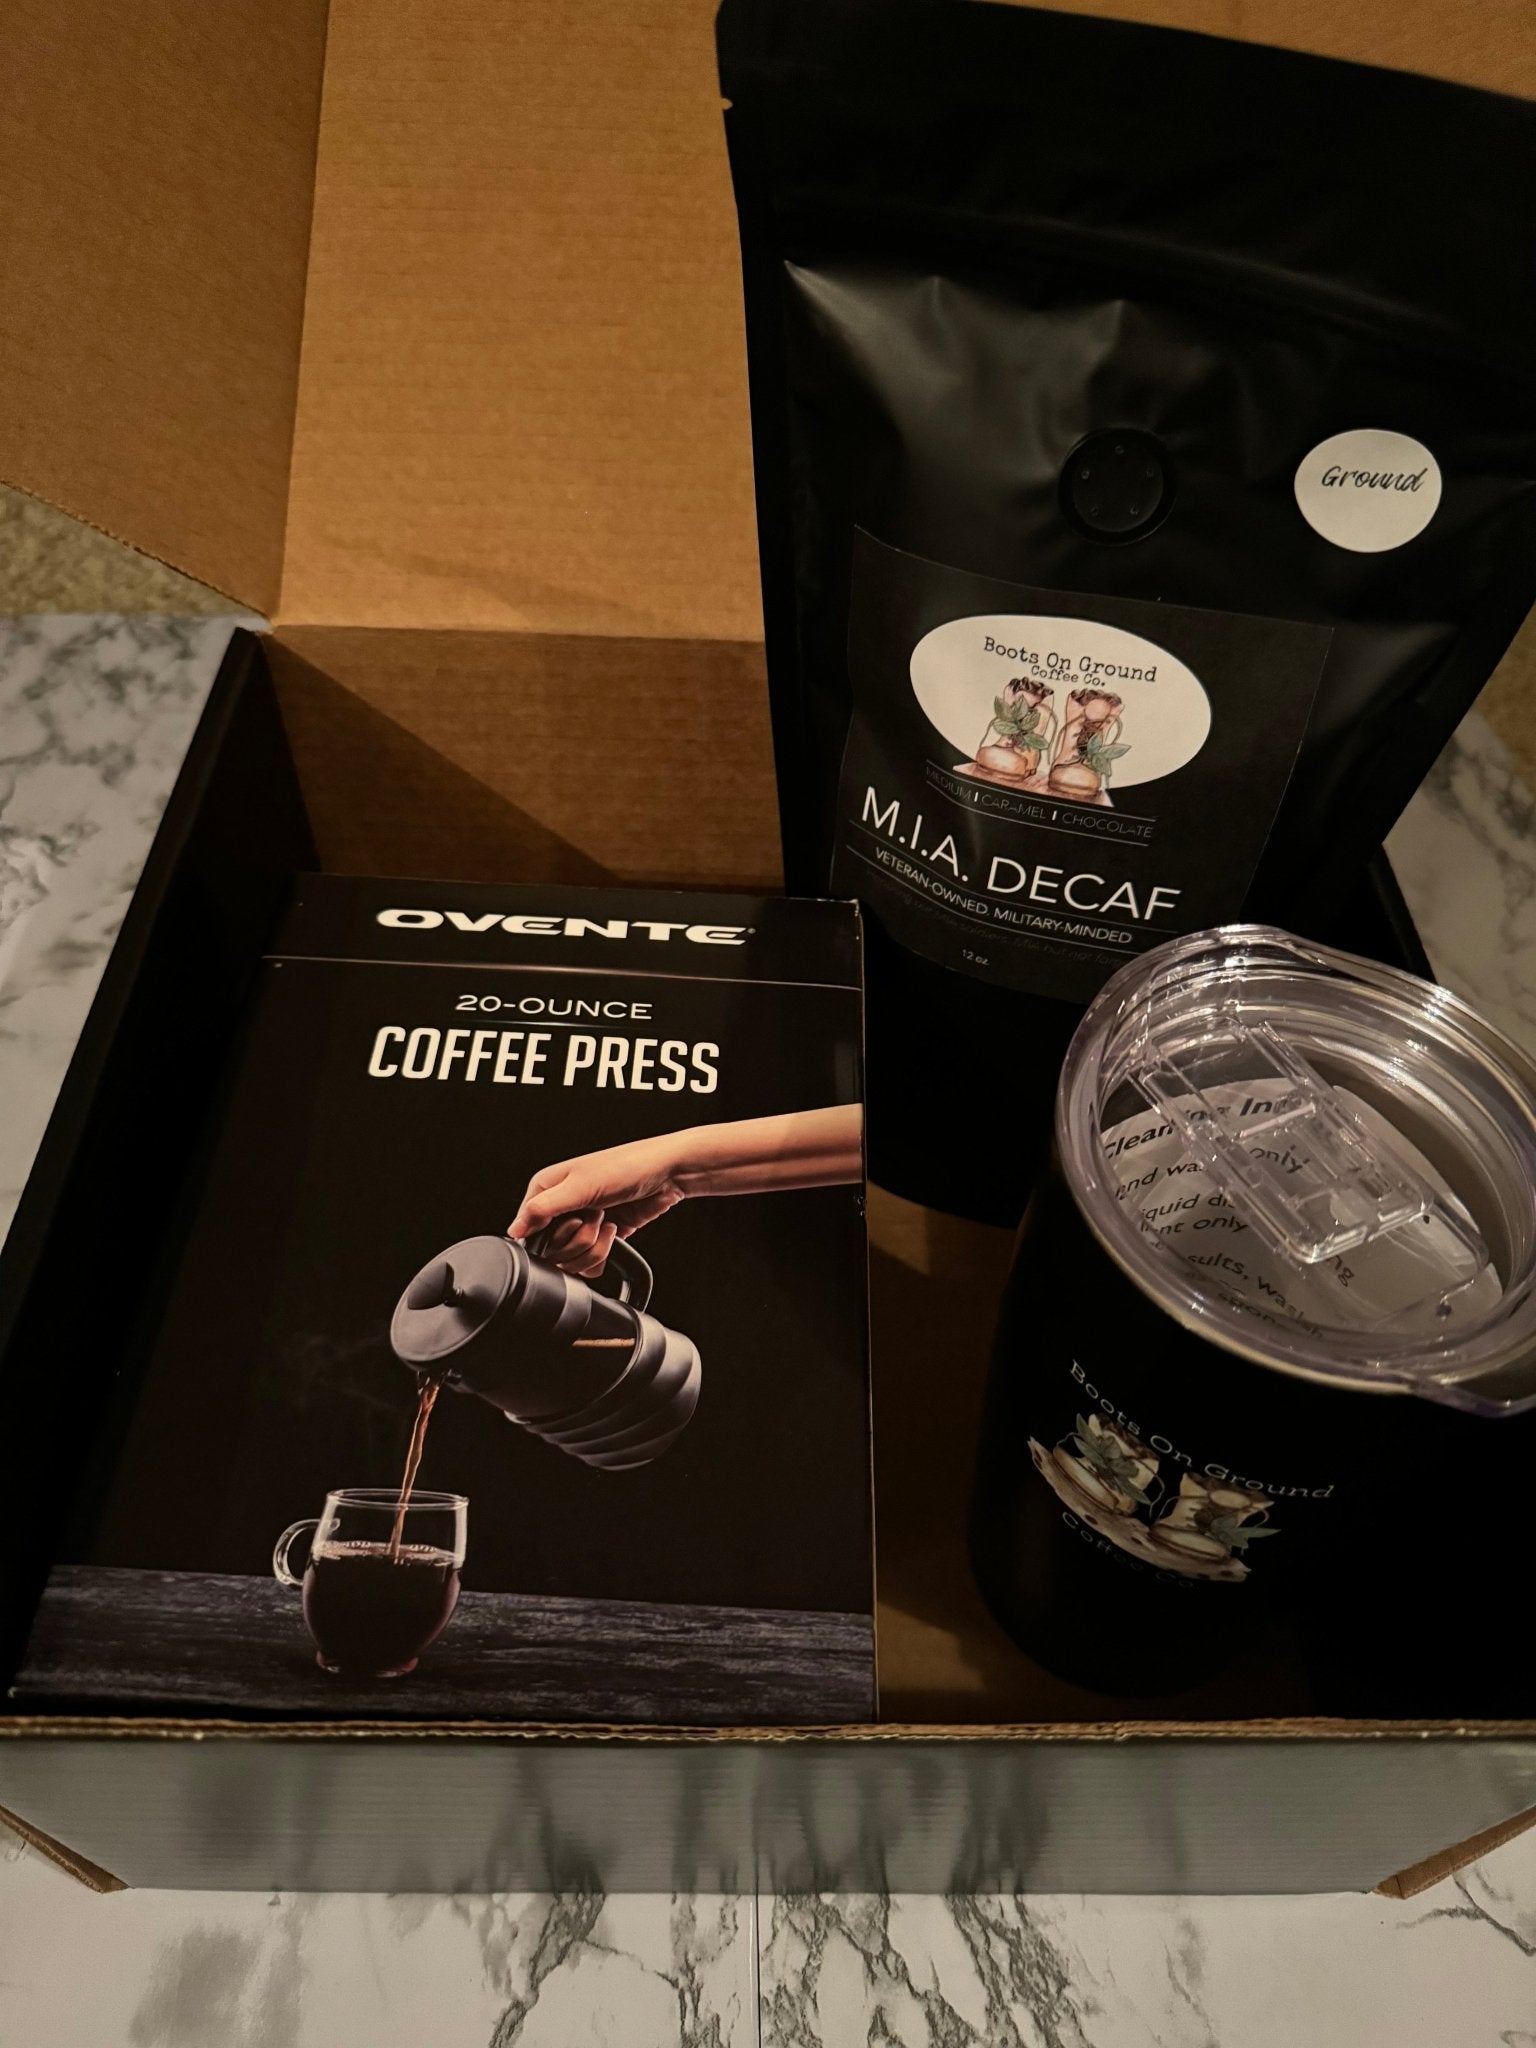 Deployment Crate - Boots on ground coffee co